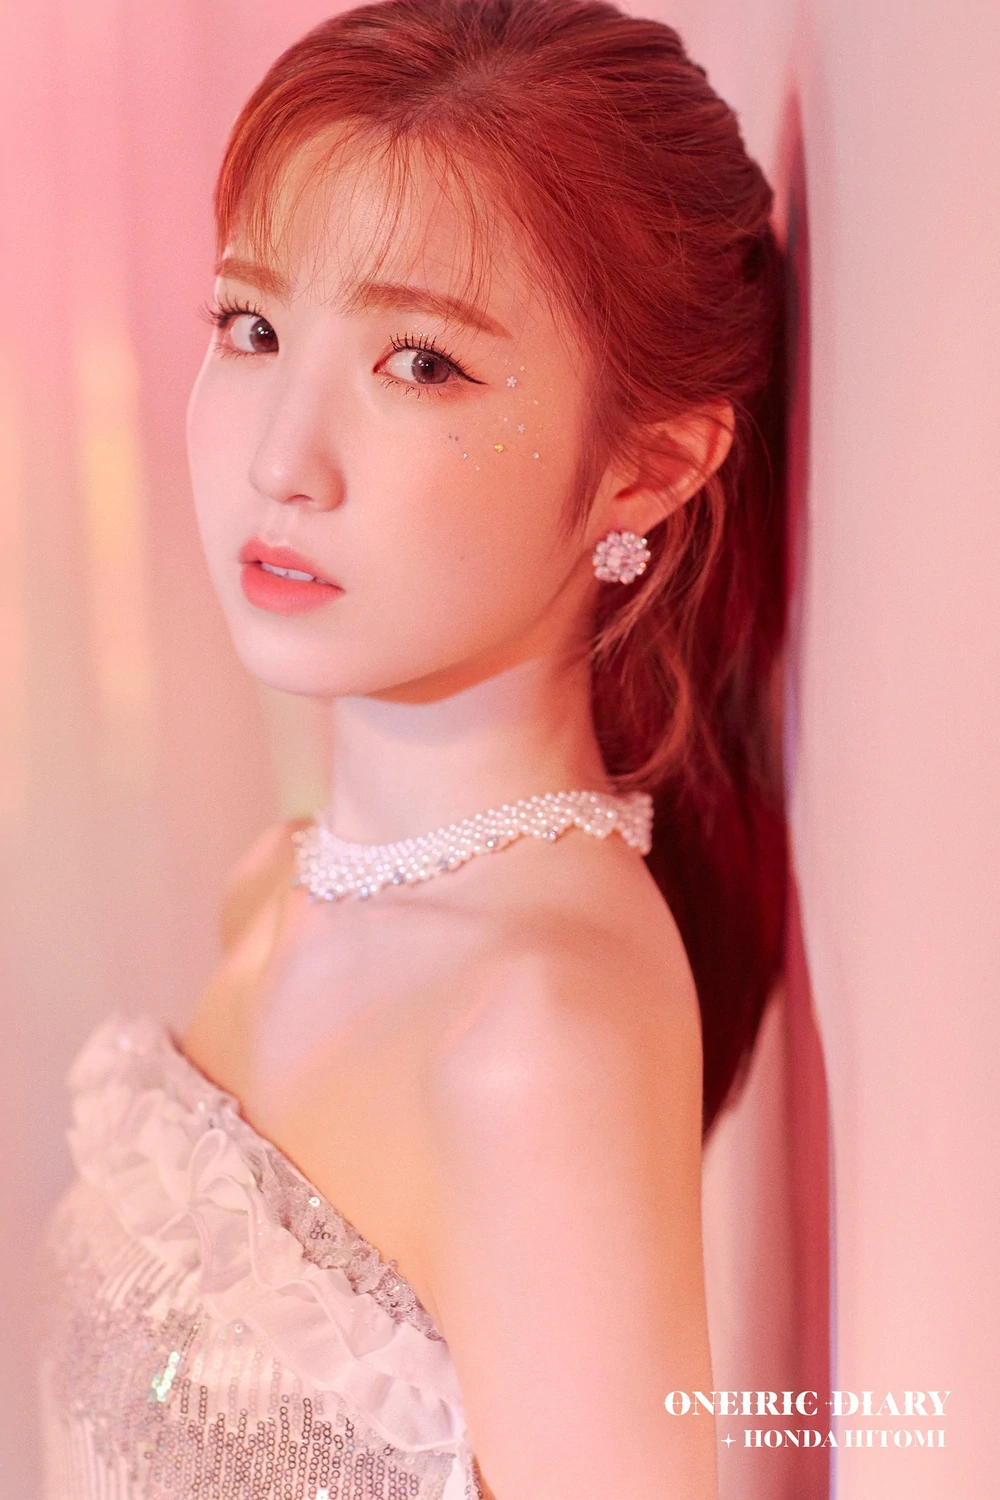 IZ*ONE Oneiric Diary Hitomi Concept Teaser Picture Image Photo Kpop K-Concept 3